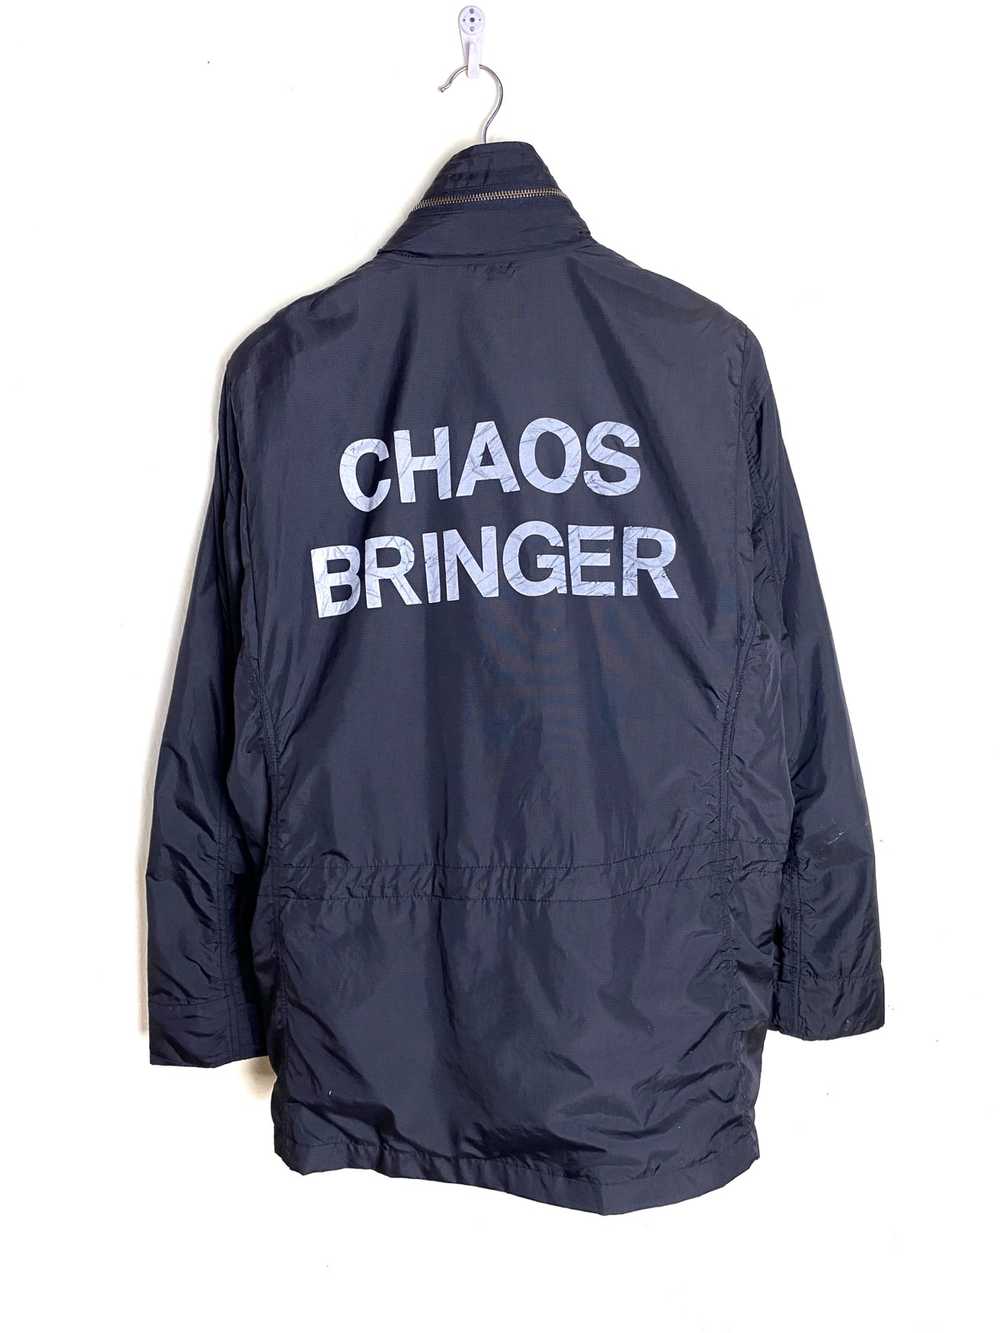 Hysteric Glamour Chaos Bringer M-65 Jacket - image 5